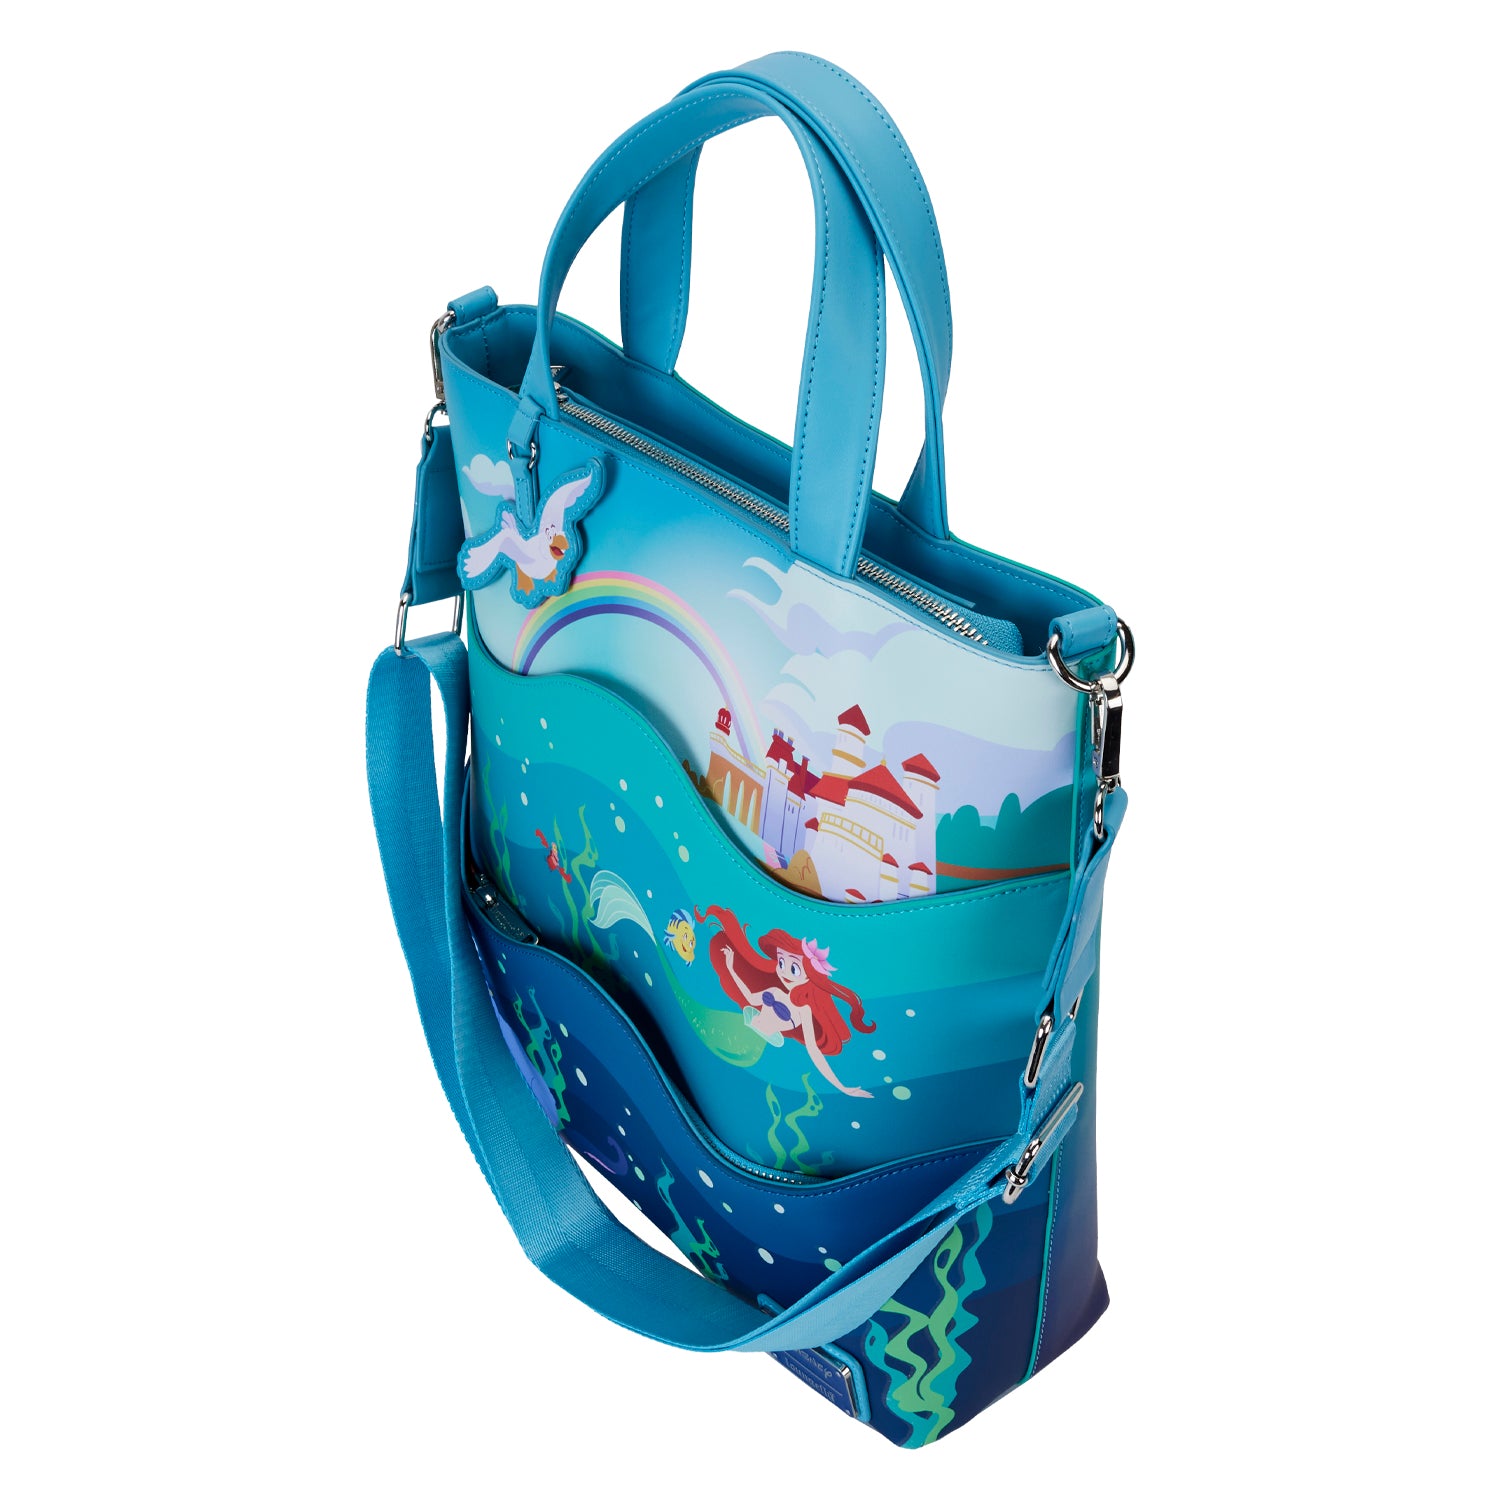 Loungefly x Disney The Little Mermaid Life is The Bubbles Tote Bag